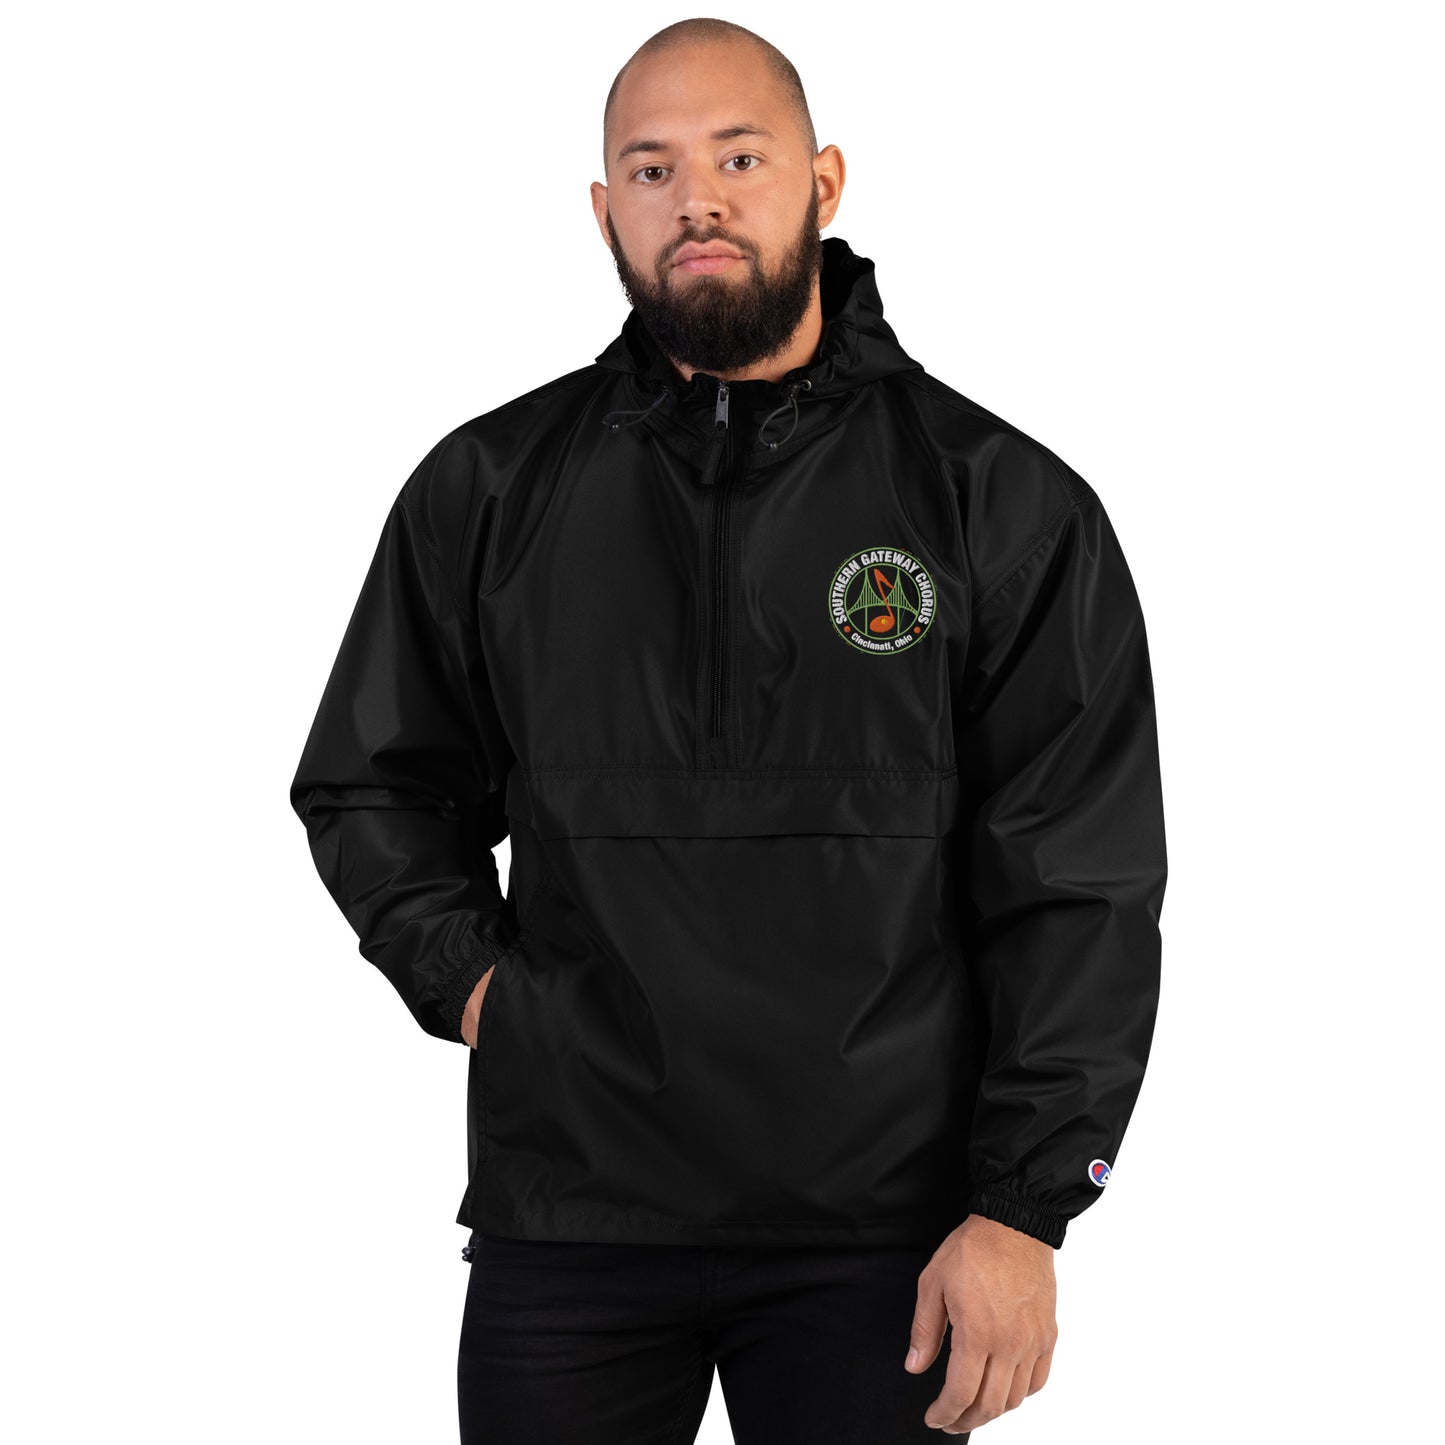 Southern Gateway Chorus - Embroidered Champion Packable Jacket